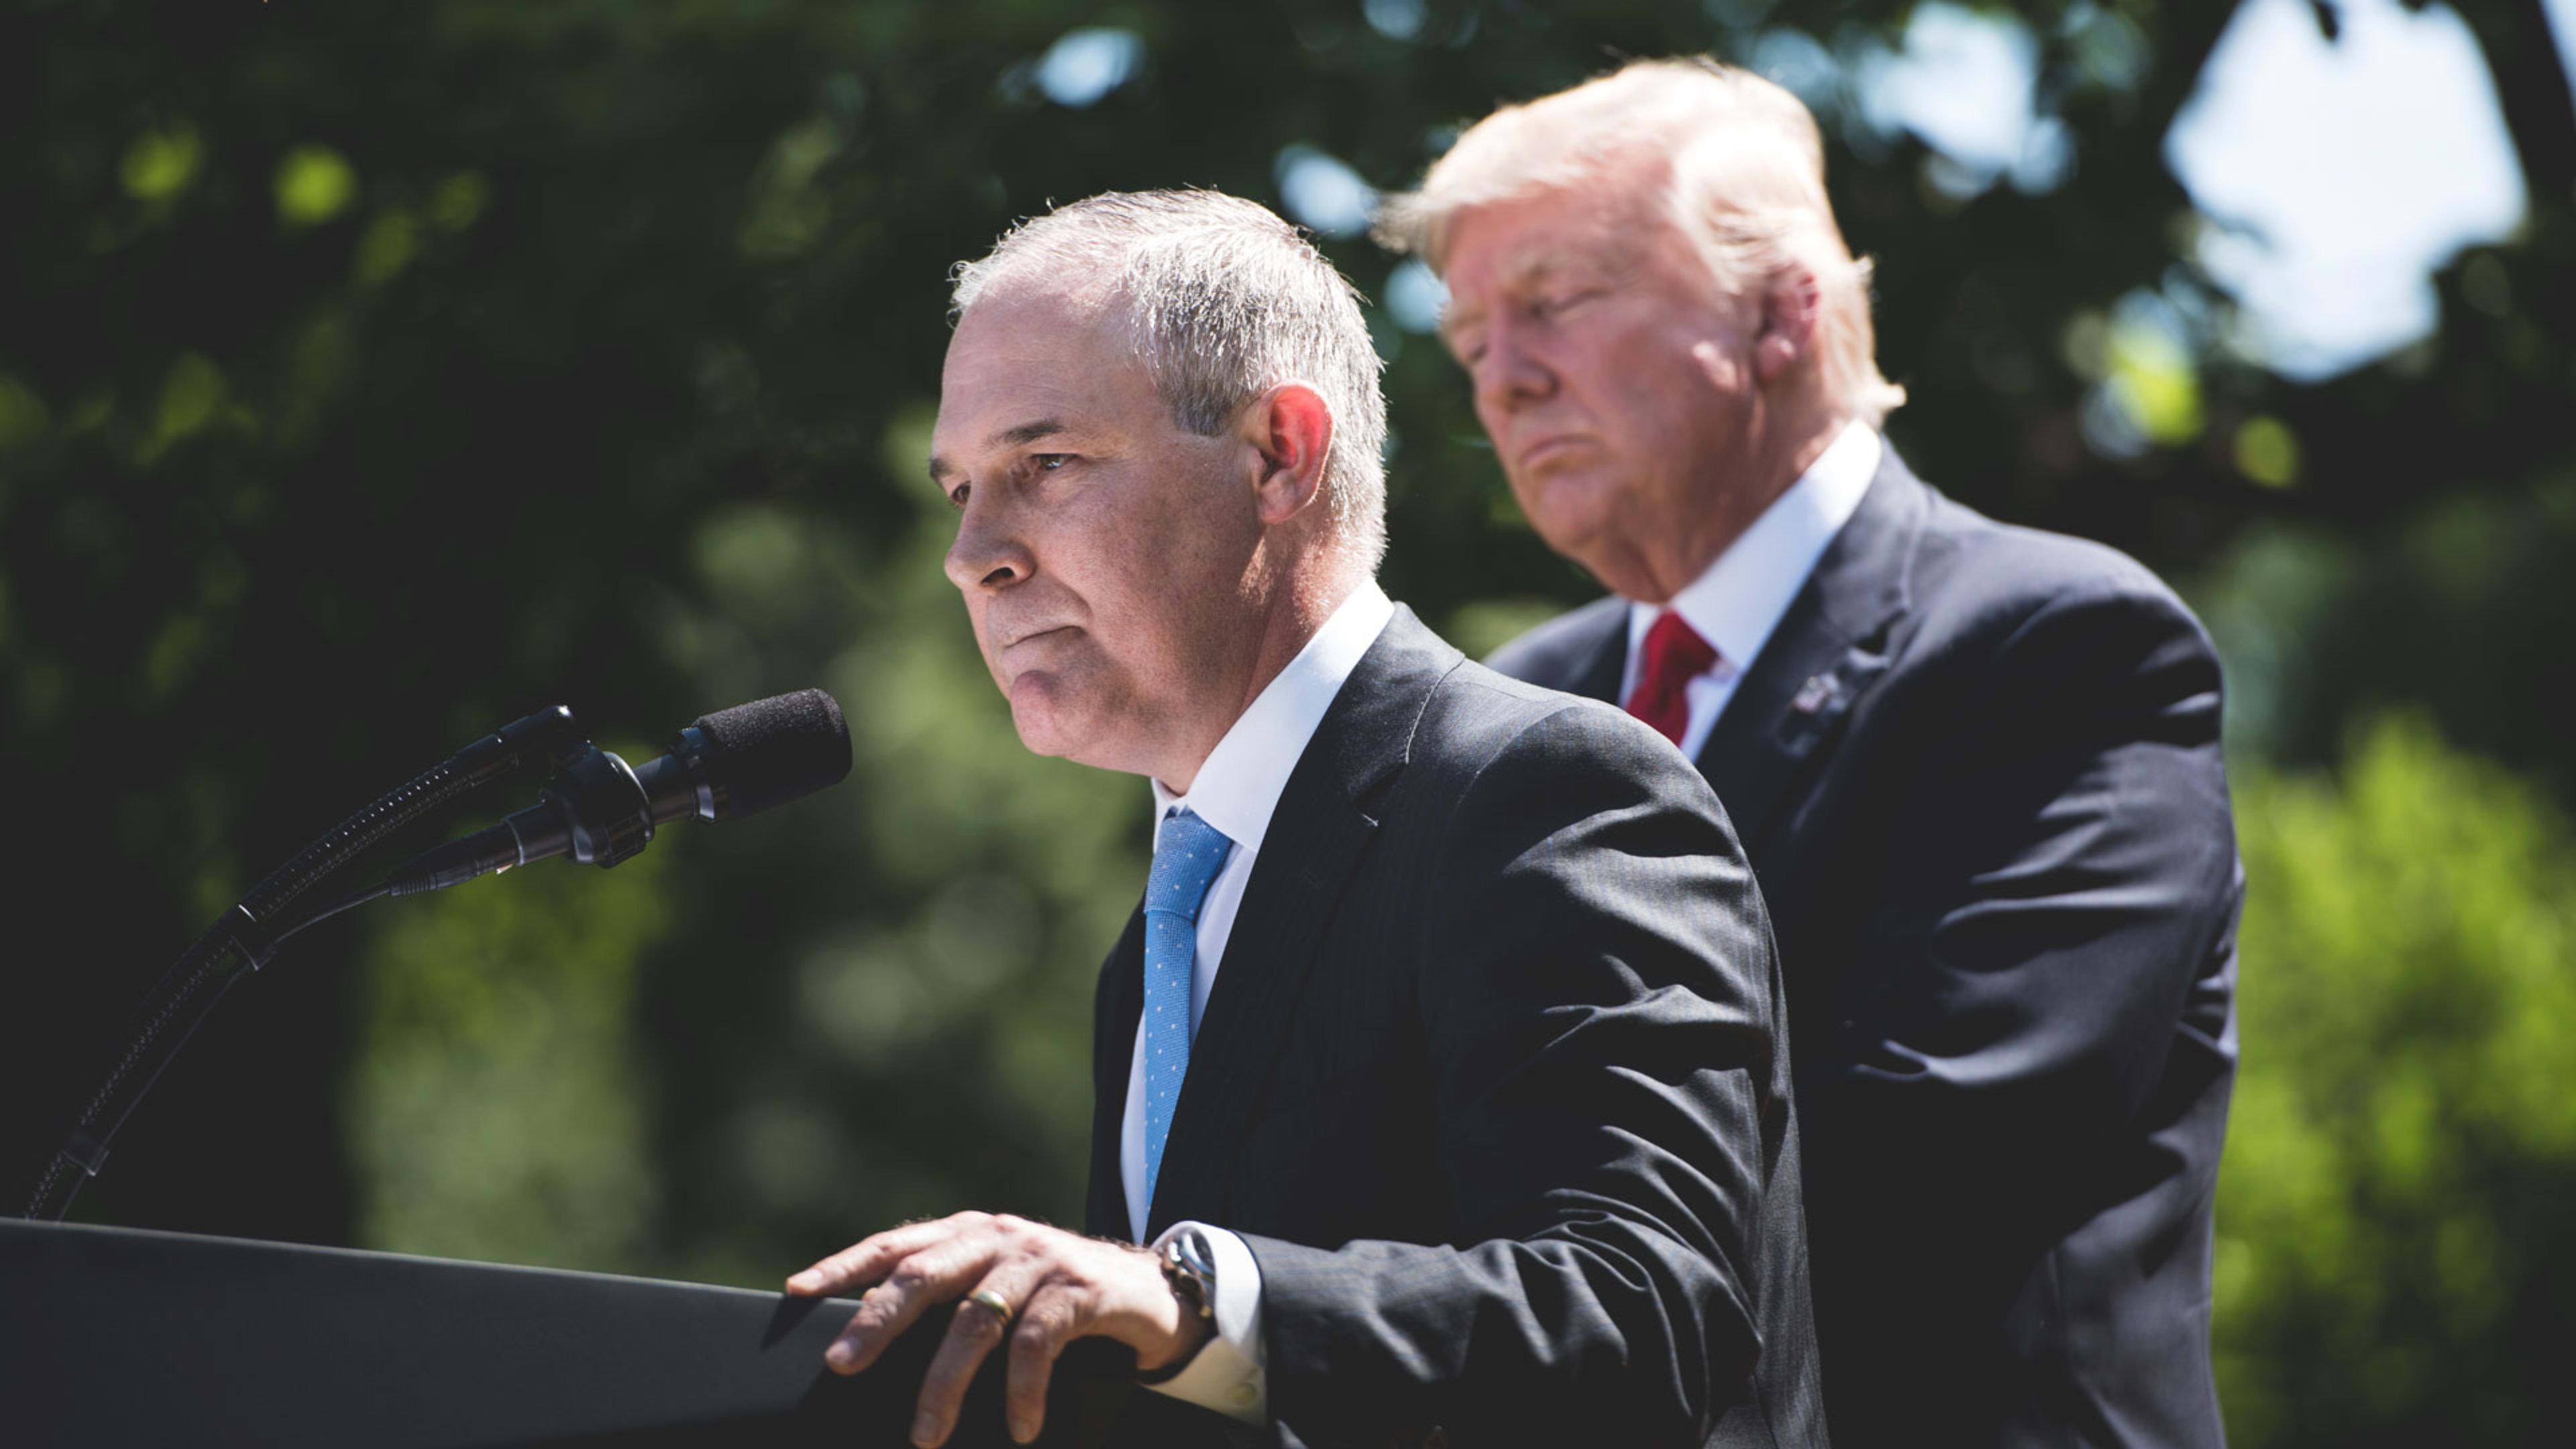 Conservative Group Led By EPA Chief Pruitt Received Dark Money To Battle Environmental Regulations